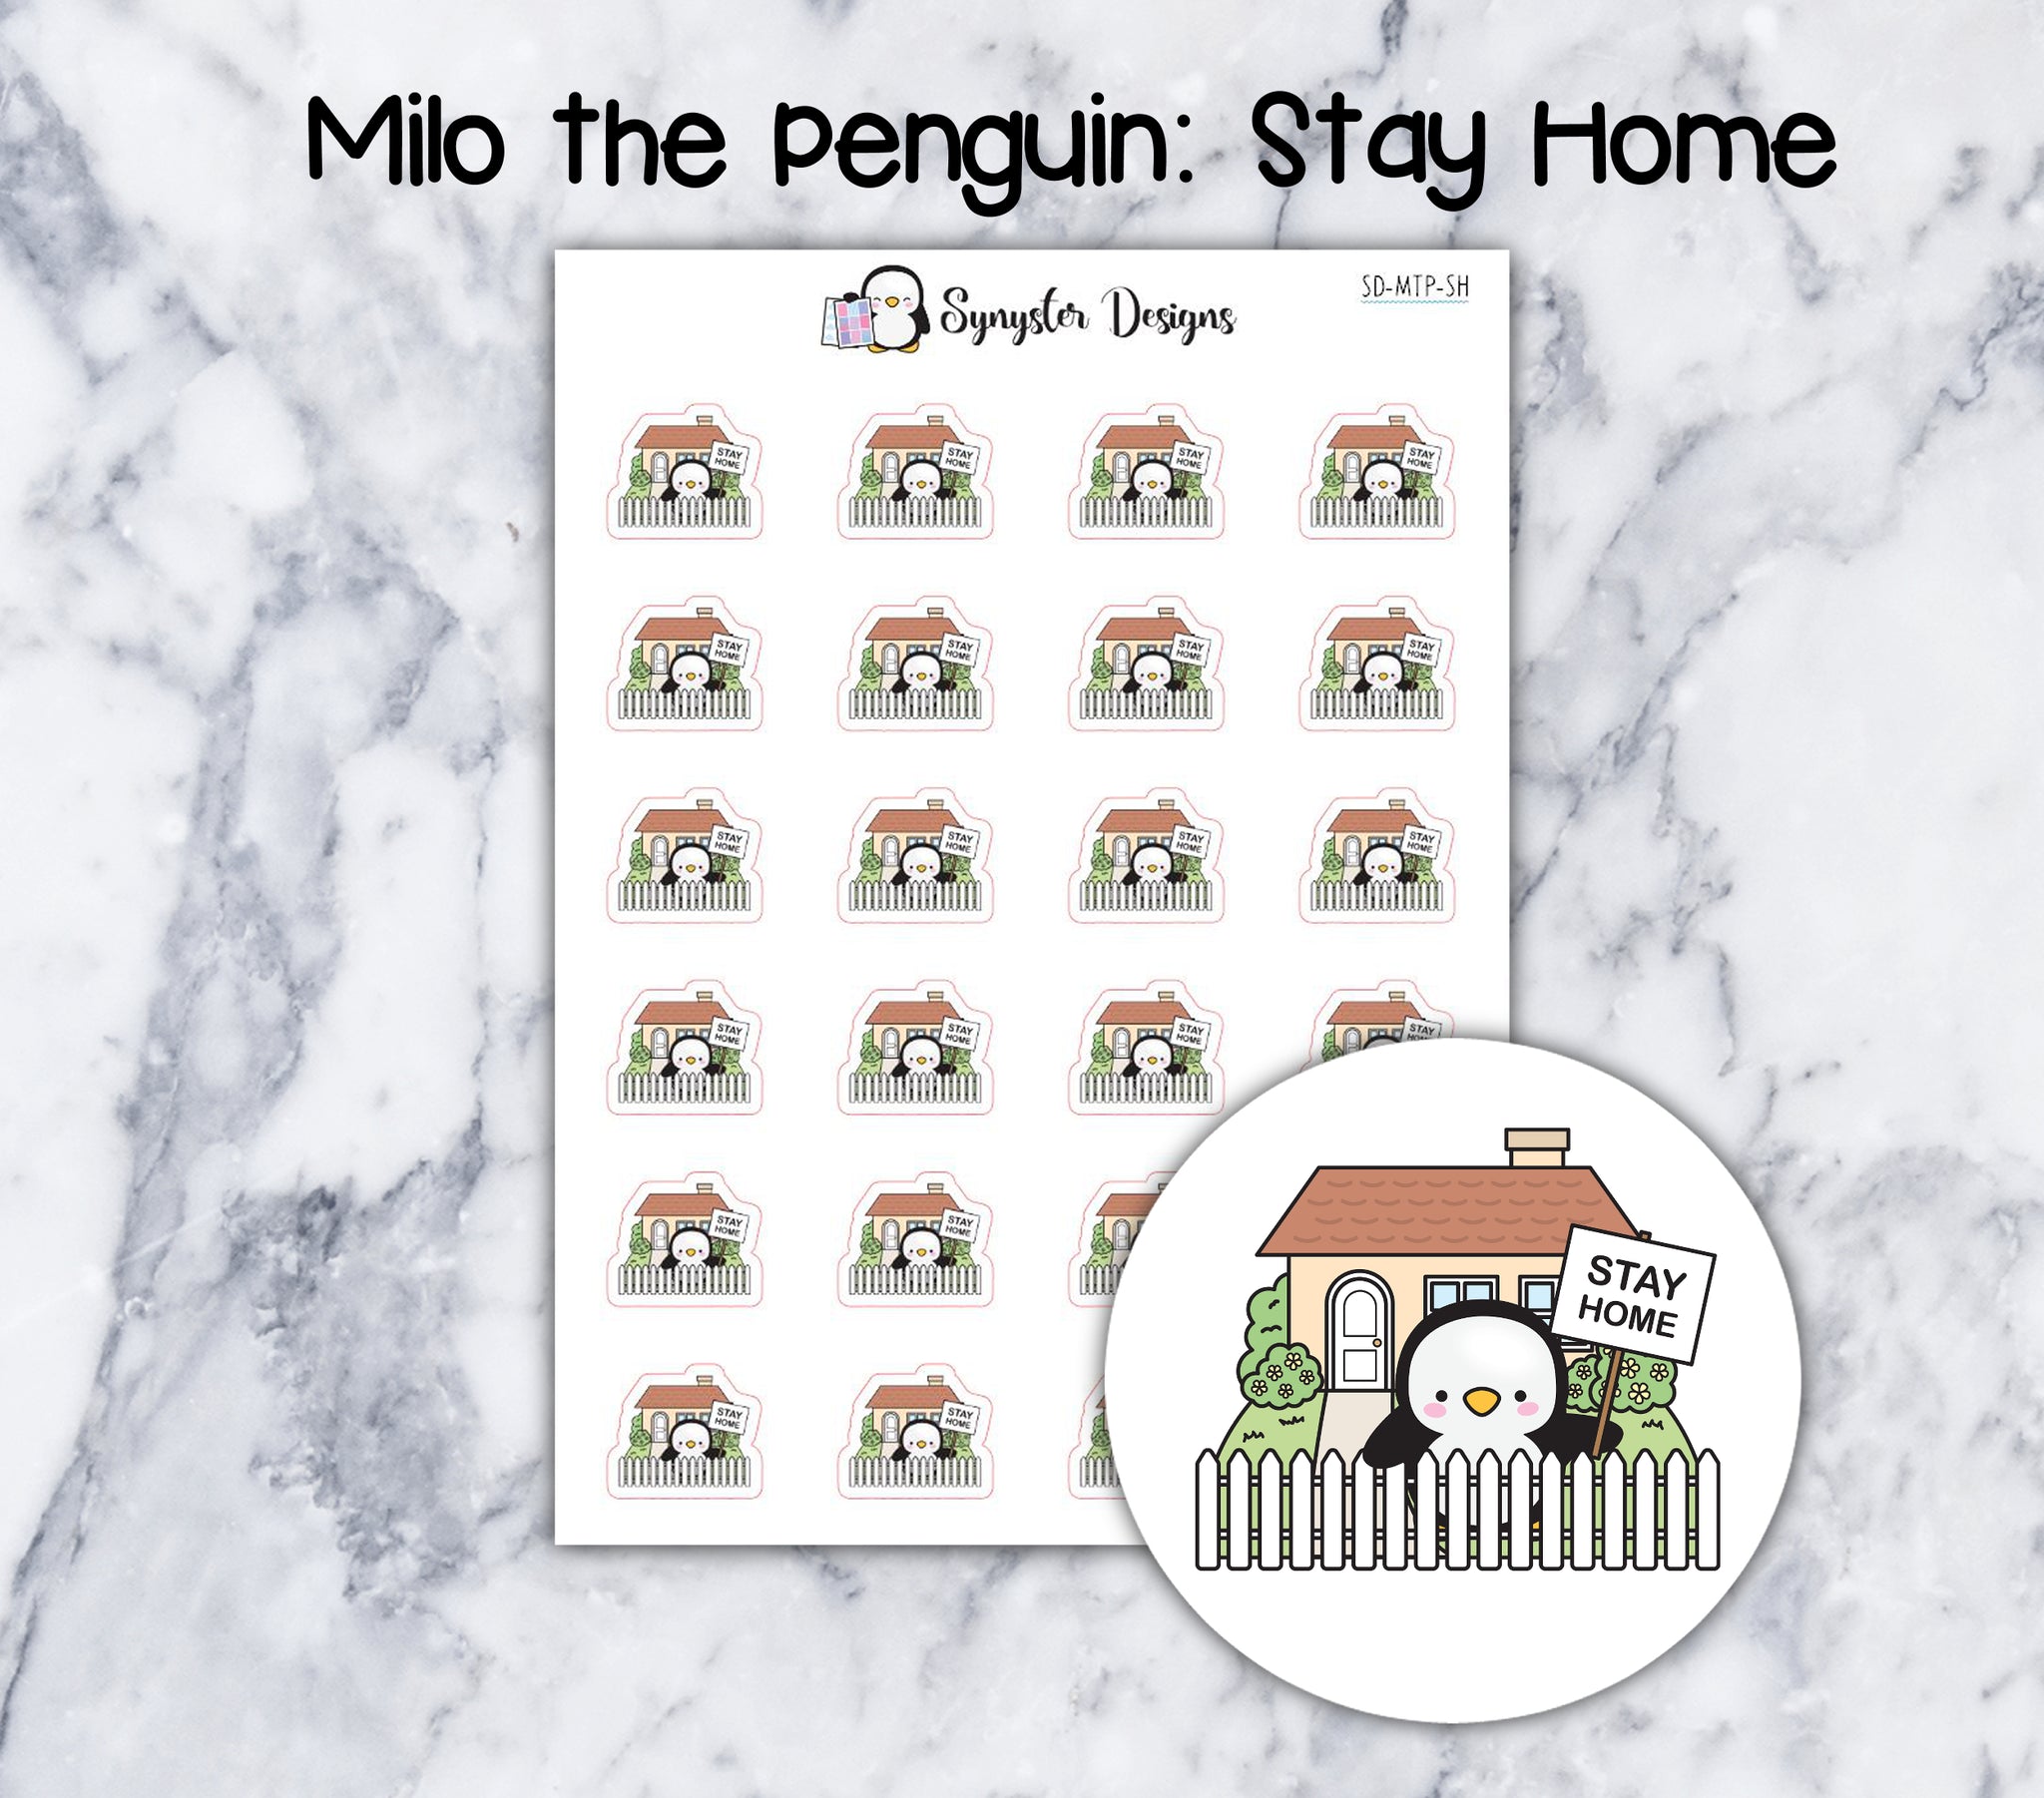 Stay Home Milo the Penguin